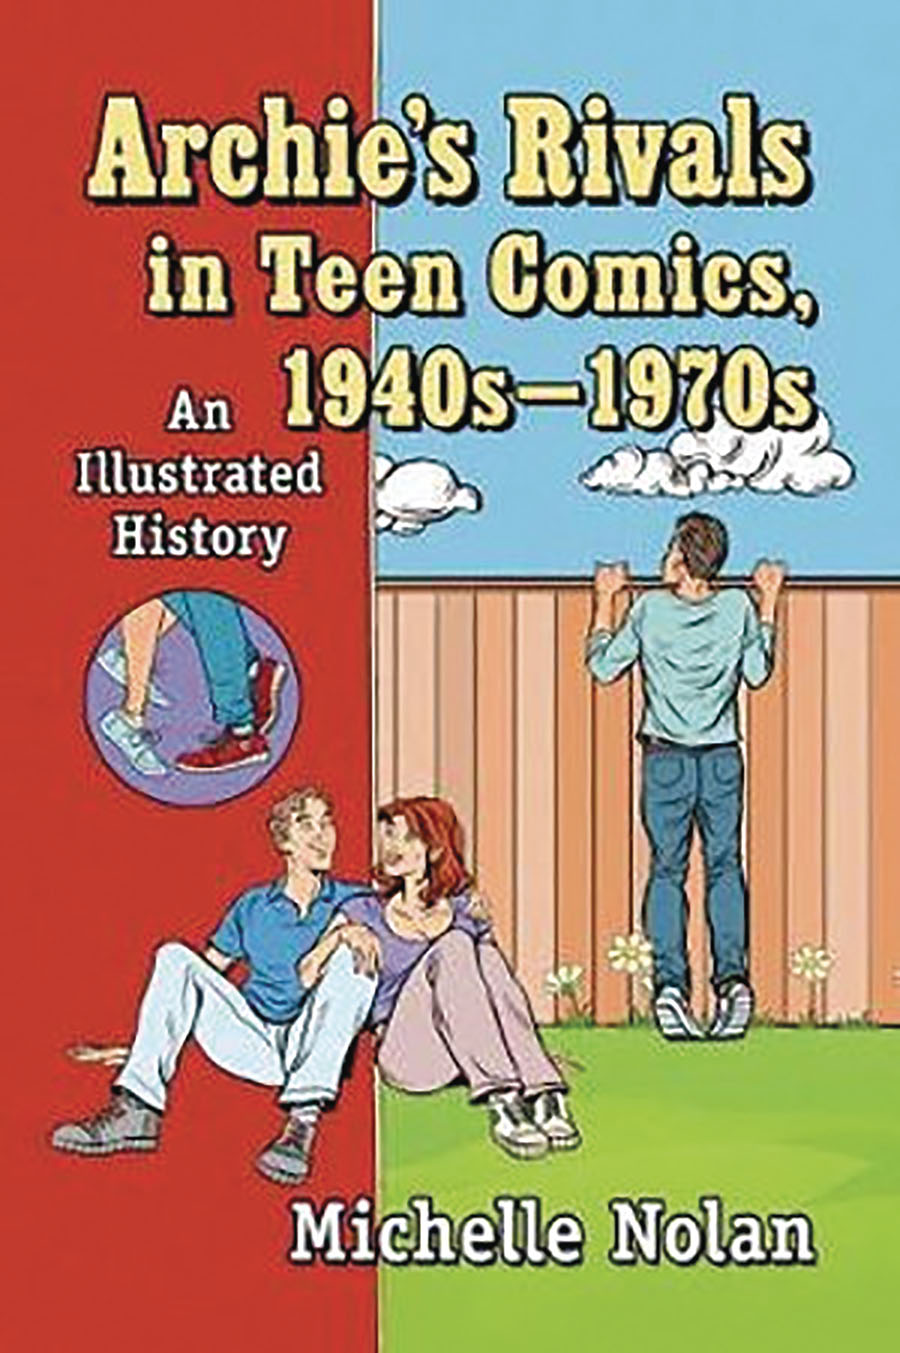 Archies Rivals In Teen Comics 1940s-1970s An Illustrated History SC